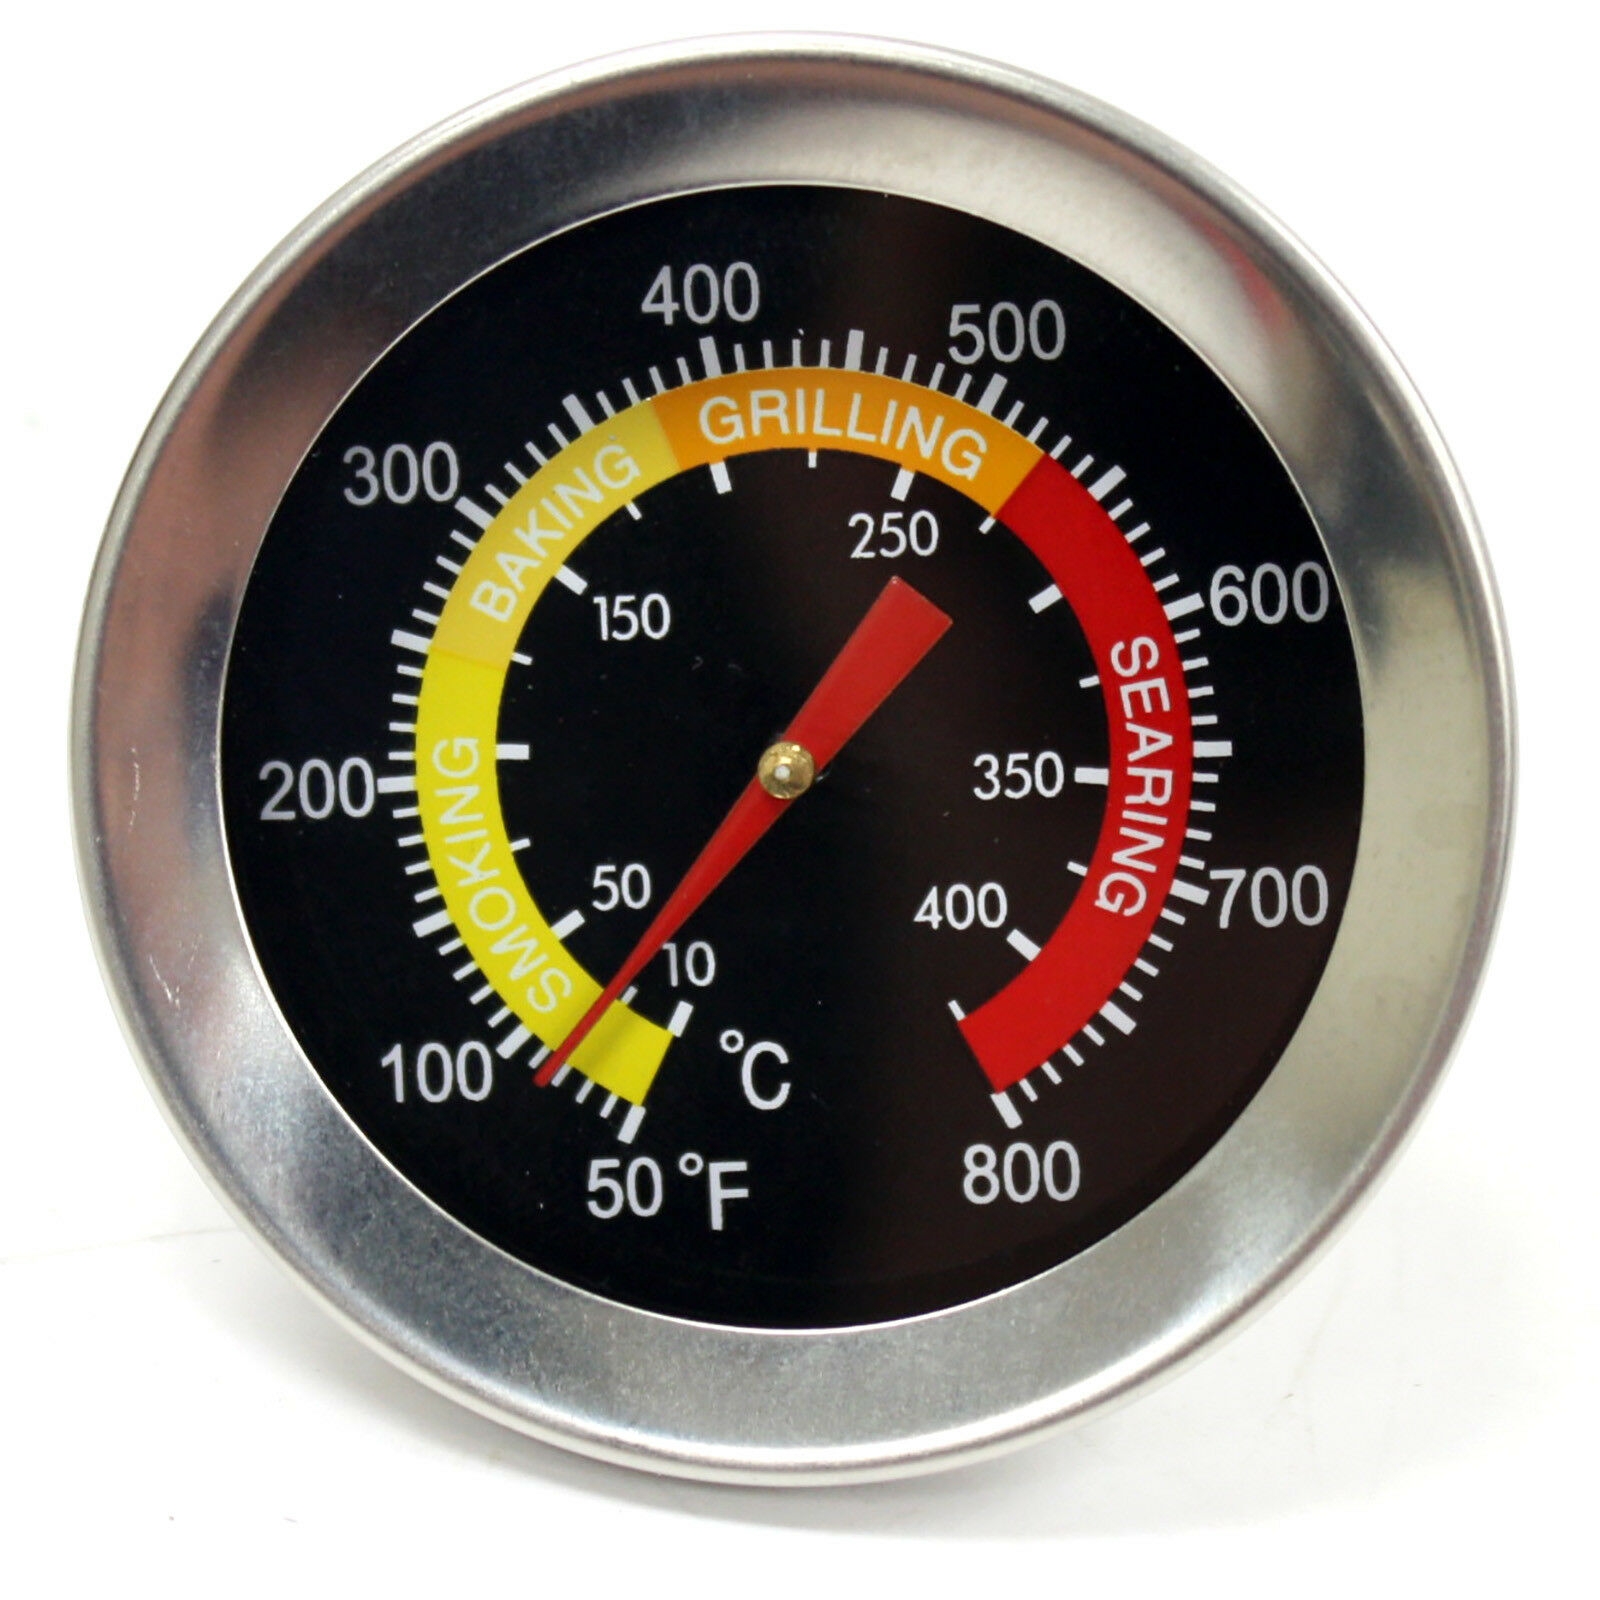 Barbecue BBQ Smoker Grill Thermometer Temperature Gauge Stainless Steel New 